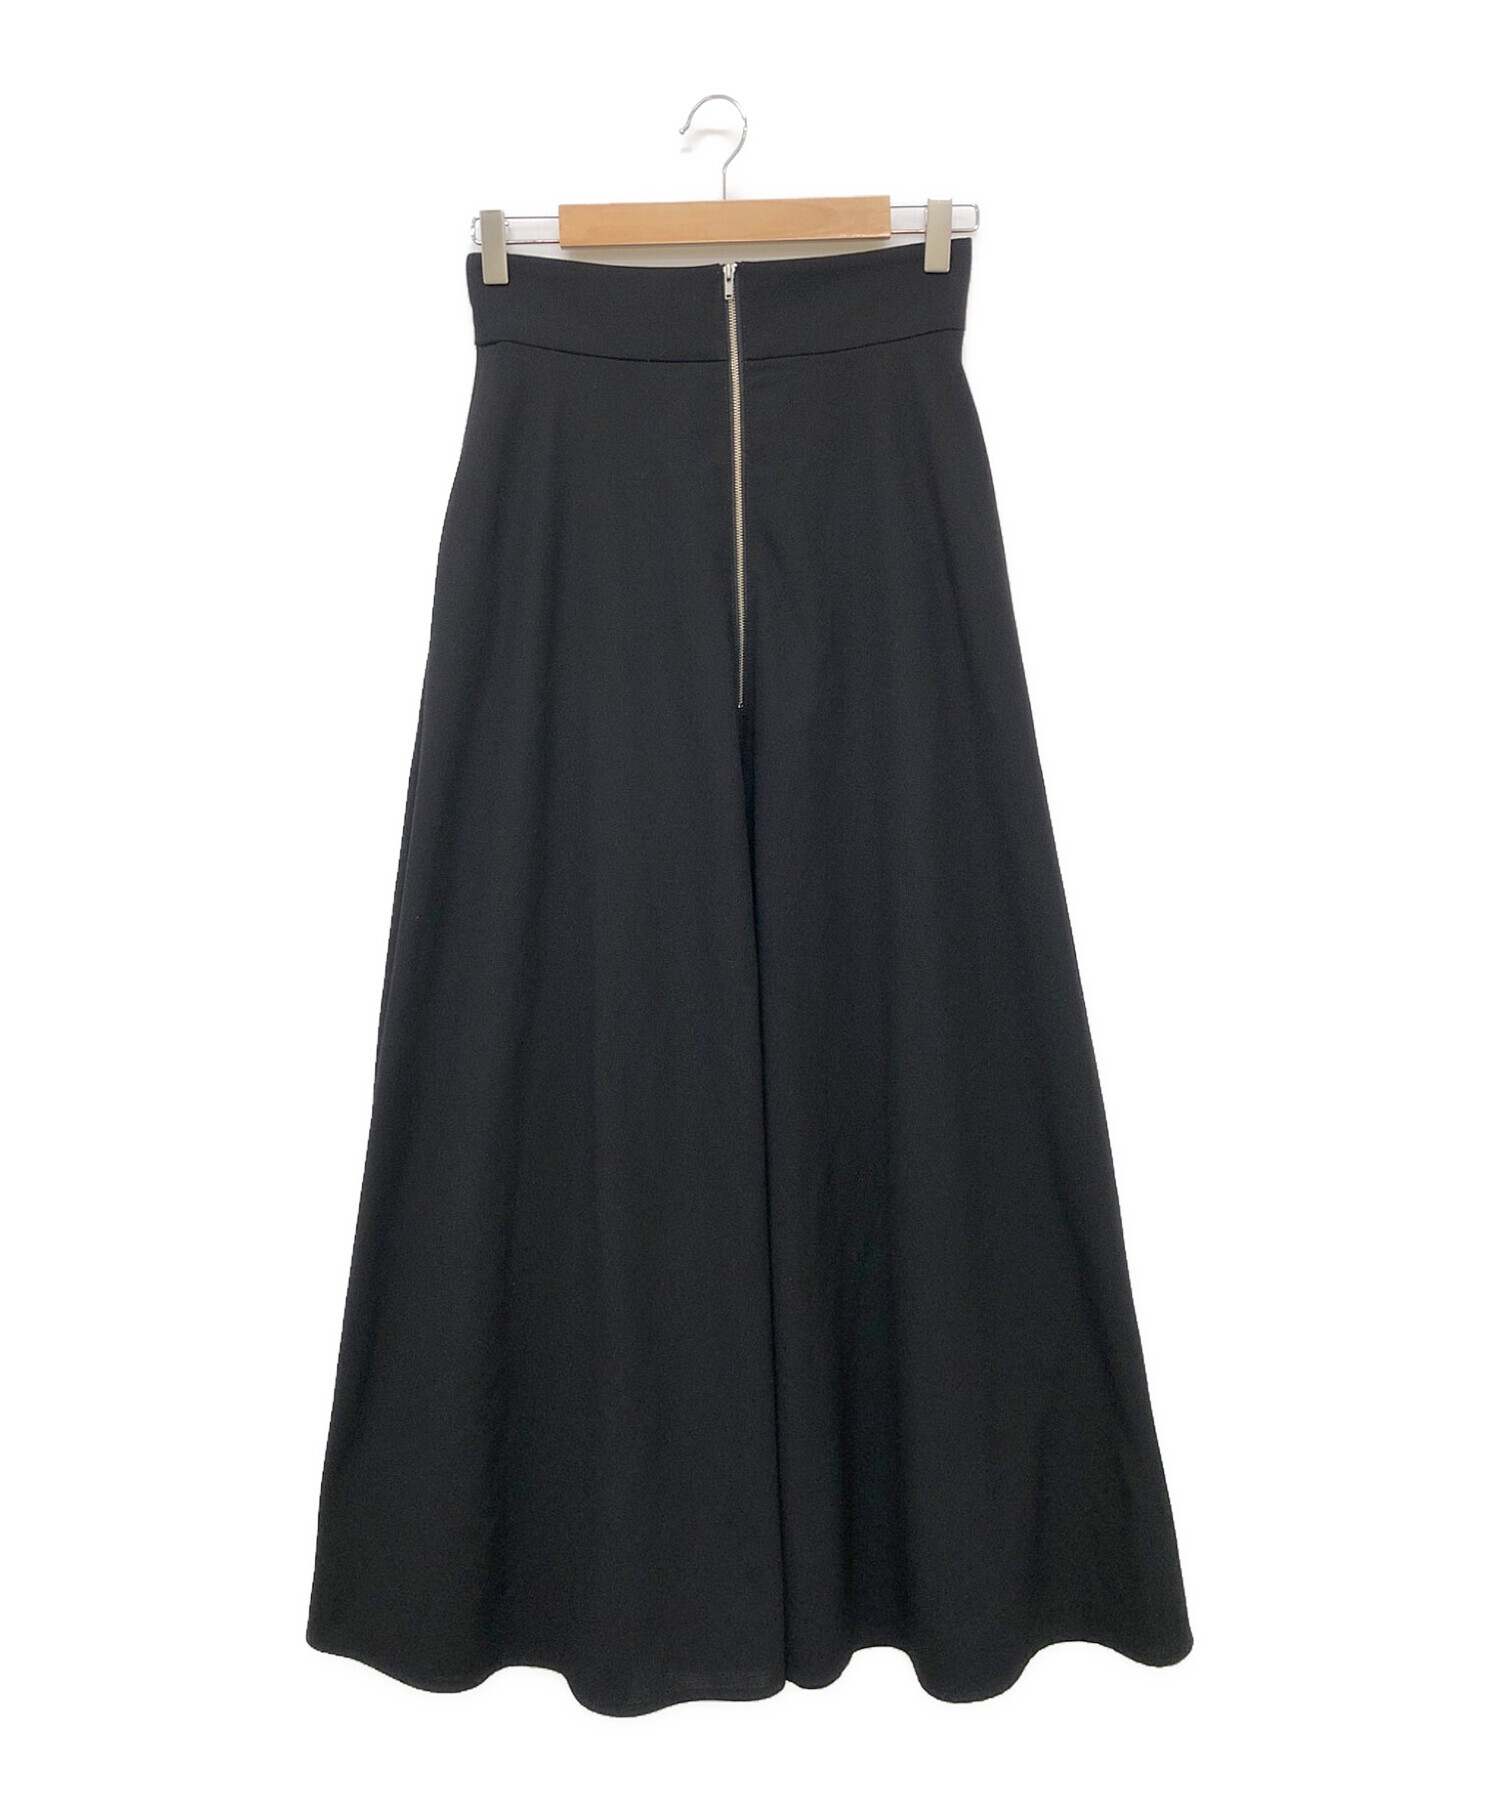 【CLANE】 W FACE FRONT ZIP FLARE SKIRT